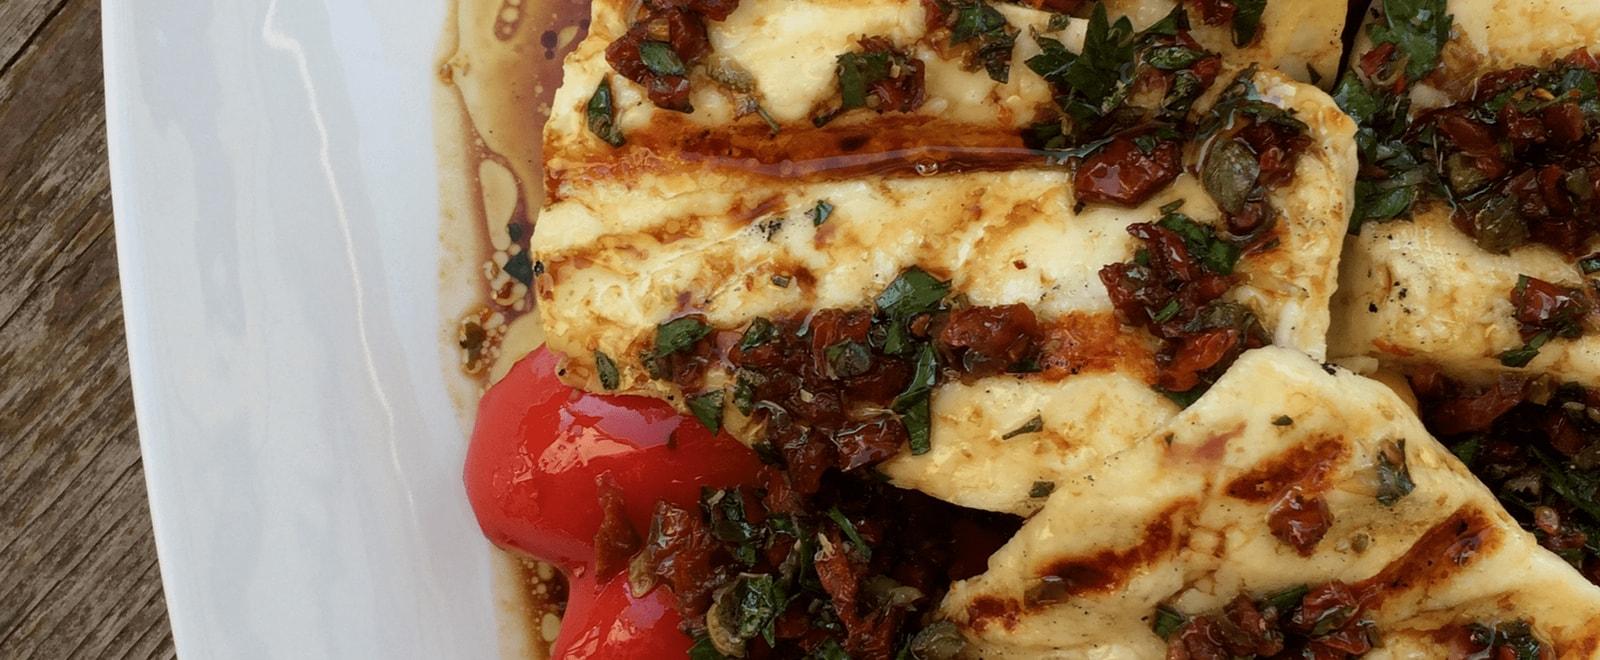 Grilled Halloumi and Peppers